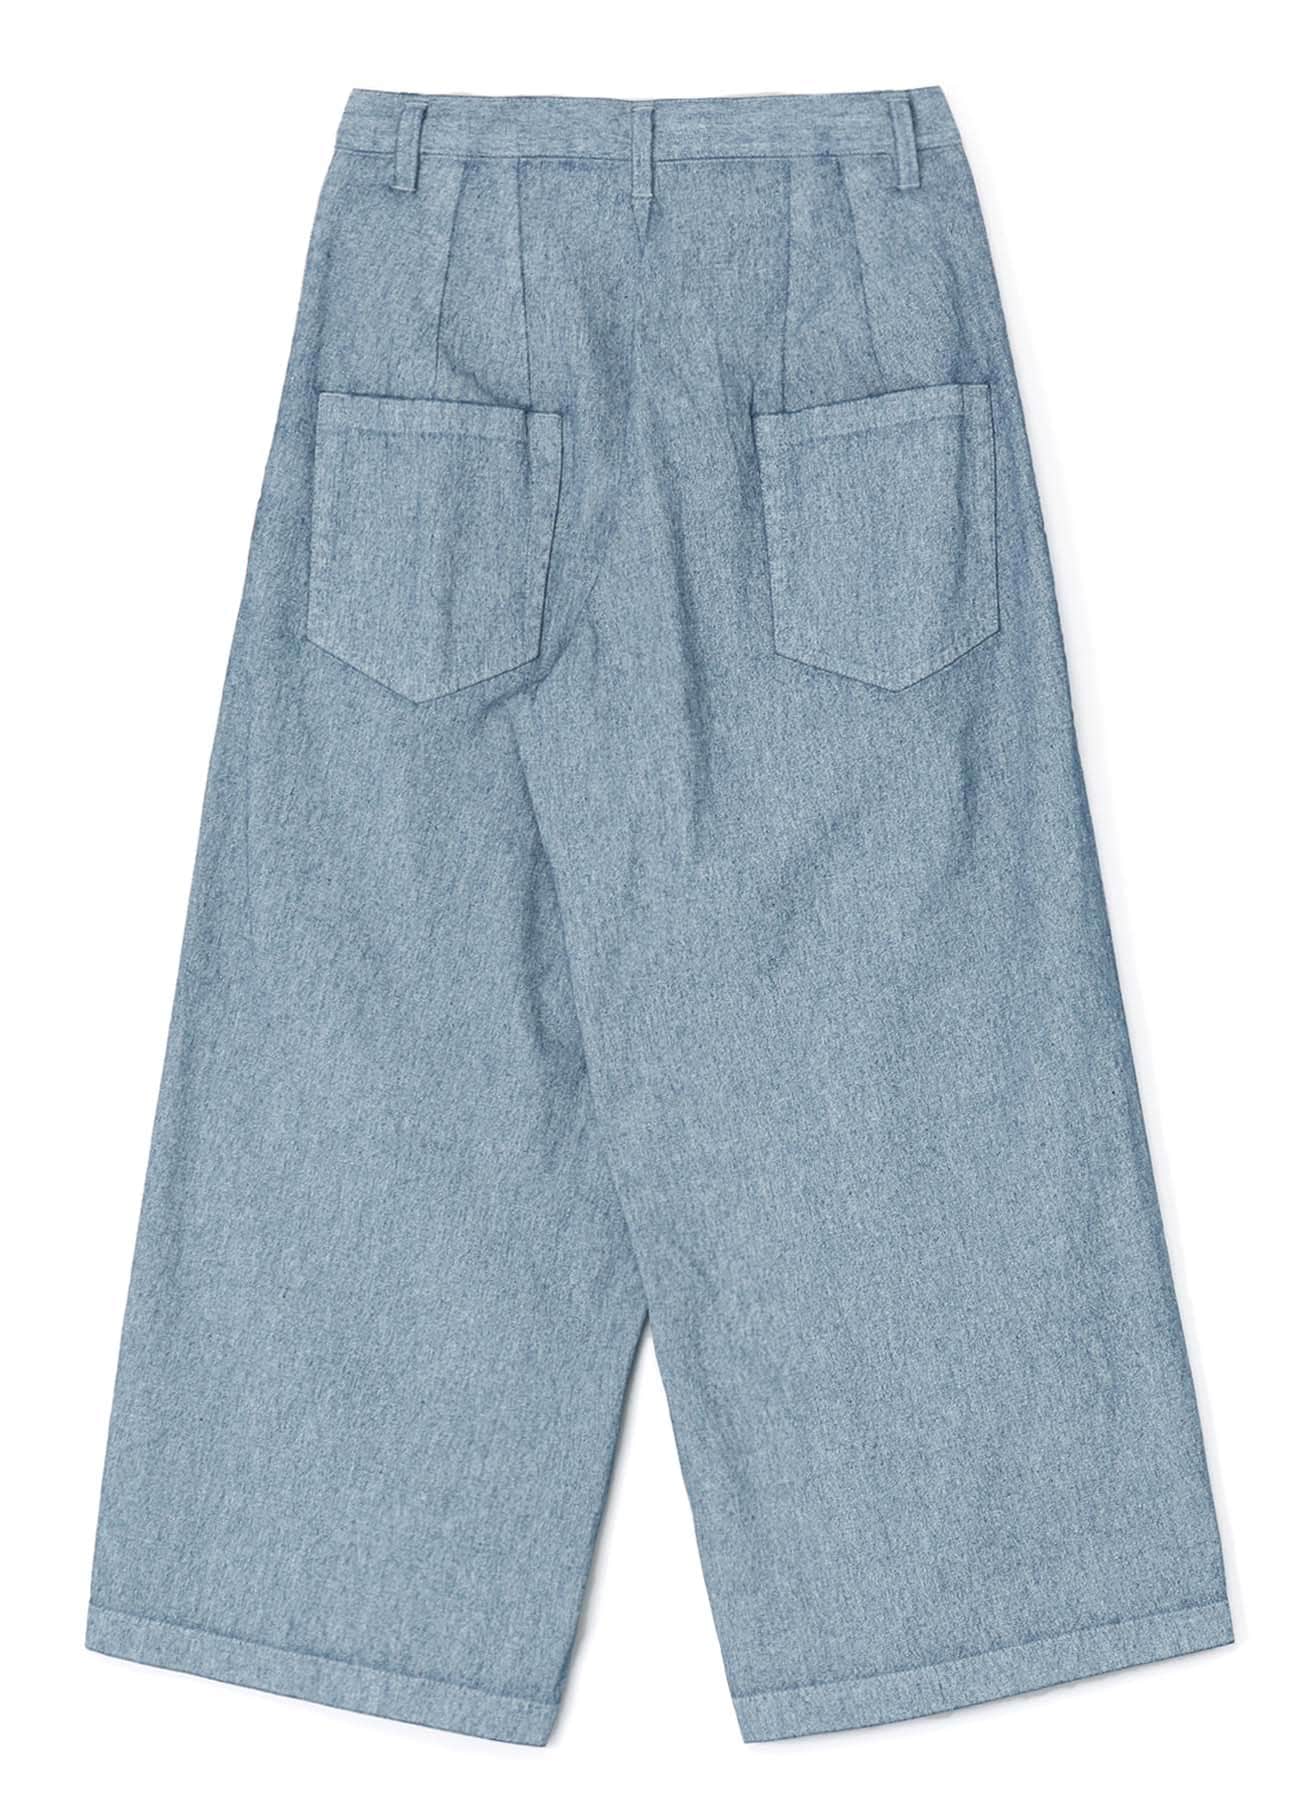 WHITE PIGMENT COATED DENIM PLEATED WIDE PANTS(XS Blue): Y's｜THE